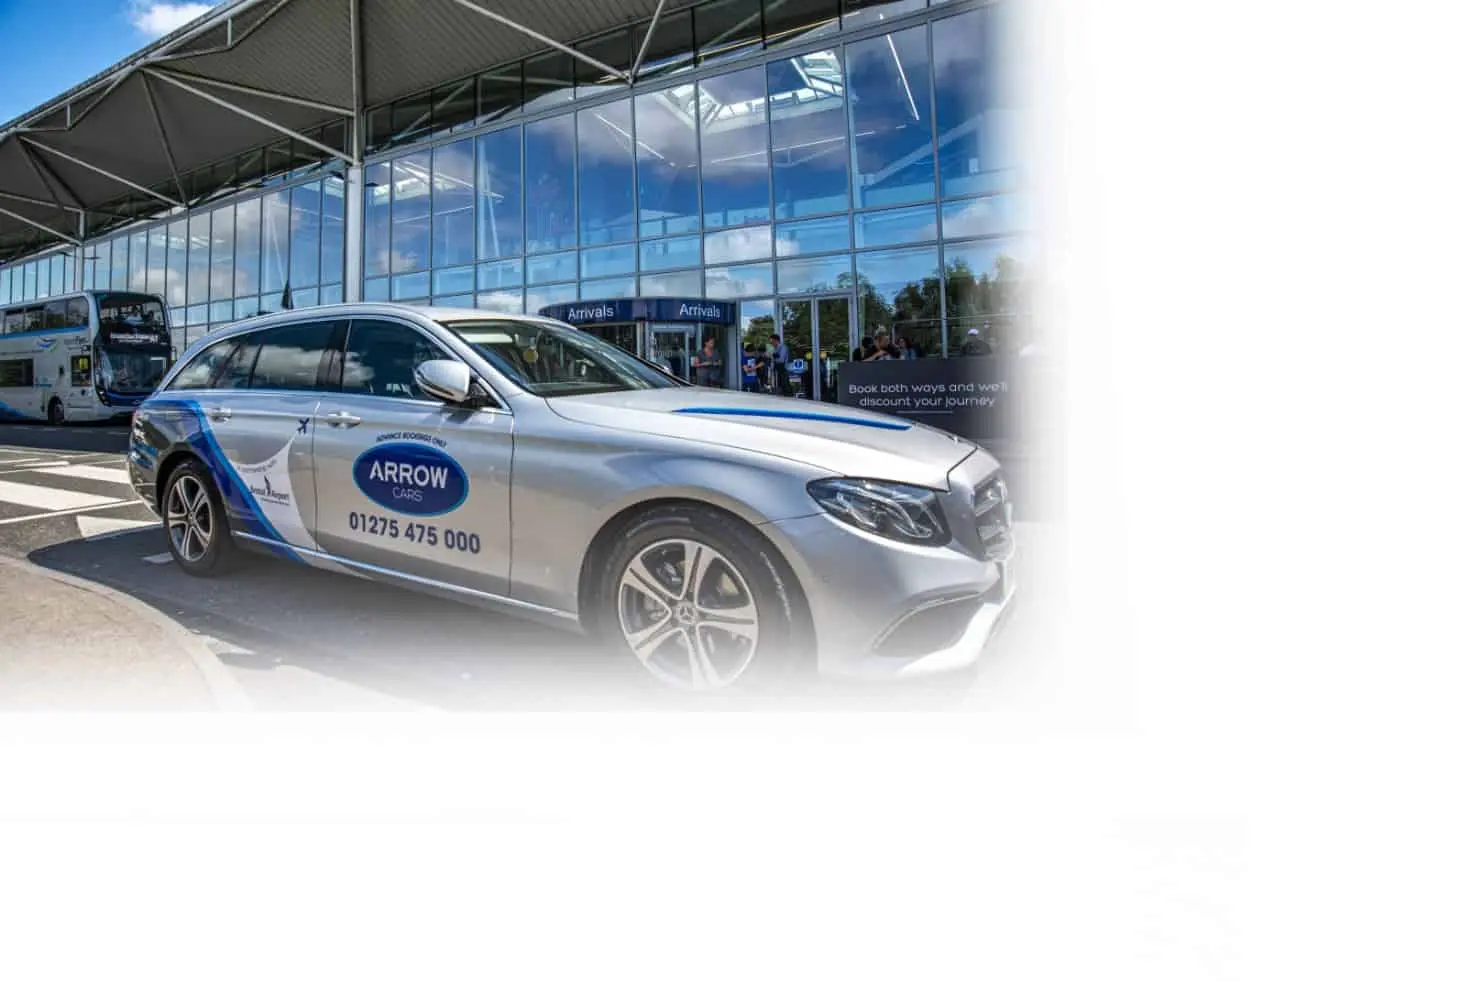 bristol airport taxi - How much is taxi from Bristol airport to city